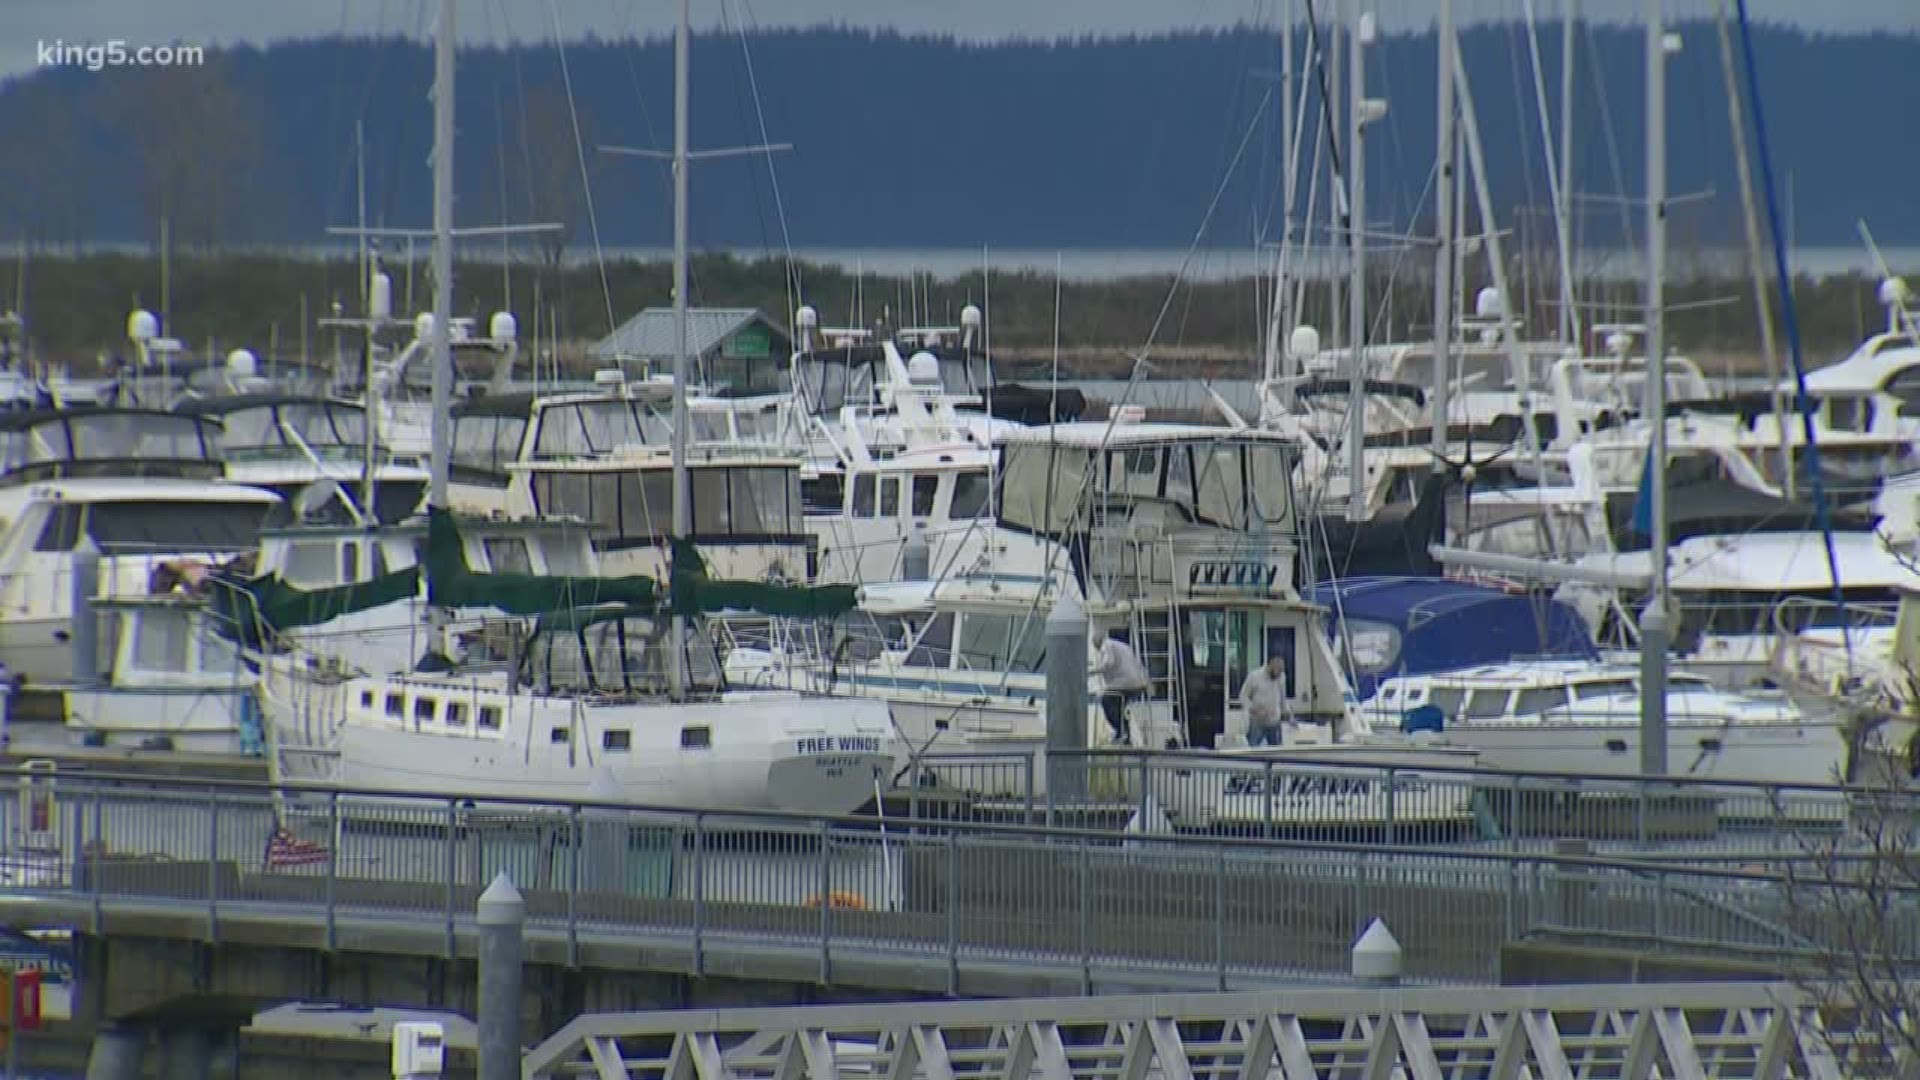 KING 5's Eric Wilkinson reports on changes happening in Snohomish County. This edition takes us to the Everett waterfront.